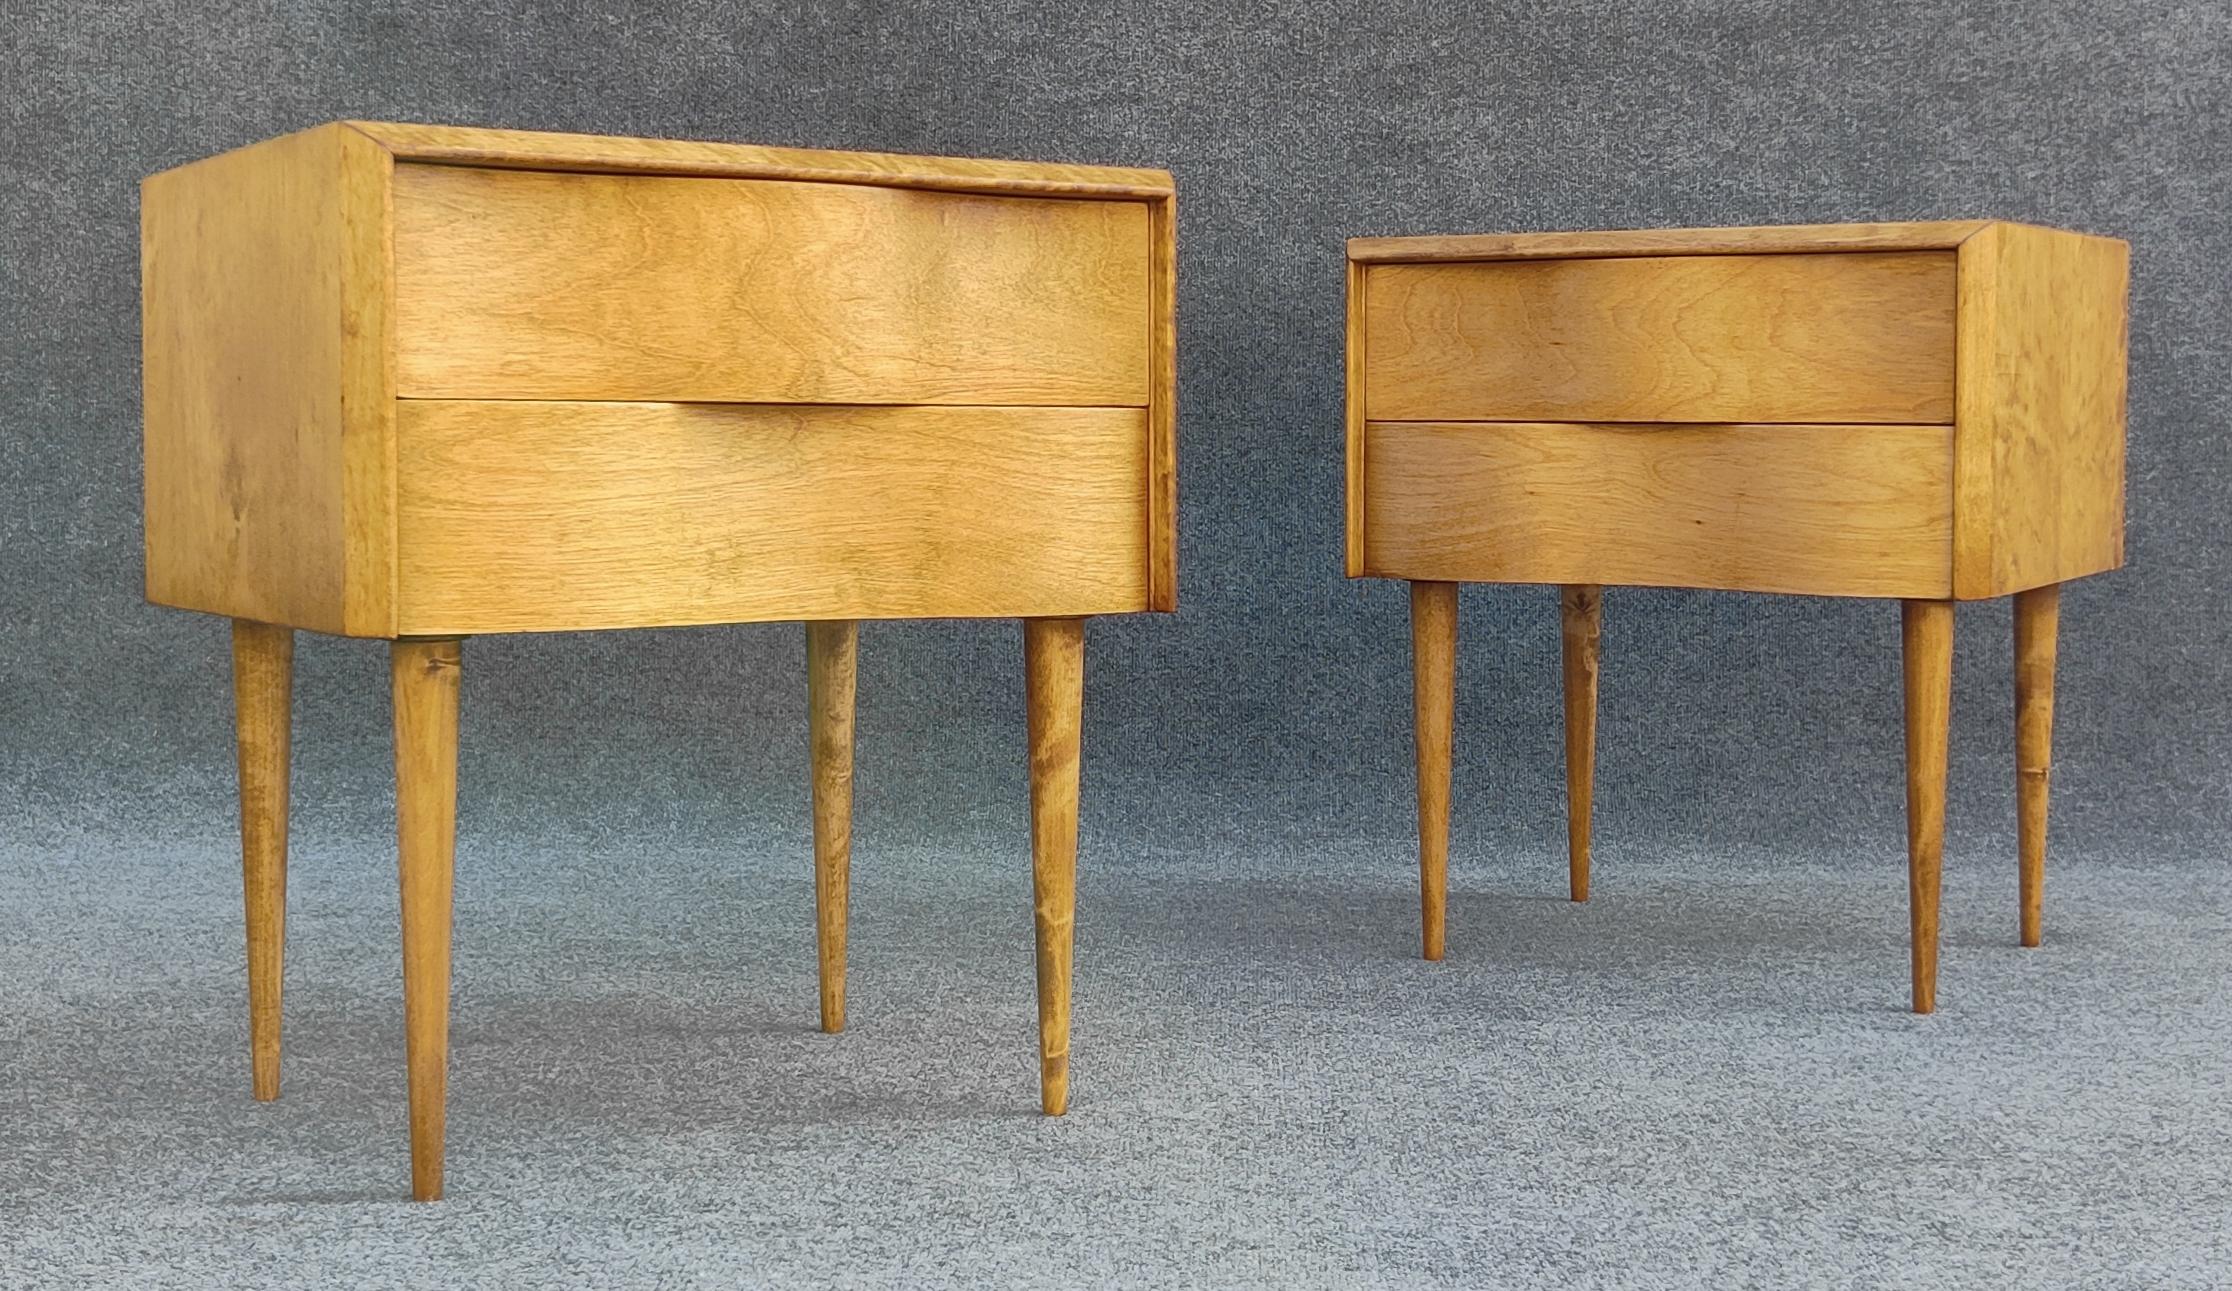 By esteemed designer Edmond Spence, these nightstands or end tables were made in Sweden for retail in the United States by Walpole Furniture. Made in the 1950s, they are reminiscent of high-end Swedish design, which was a powerful player in